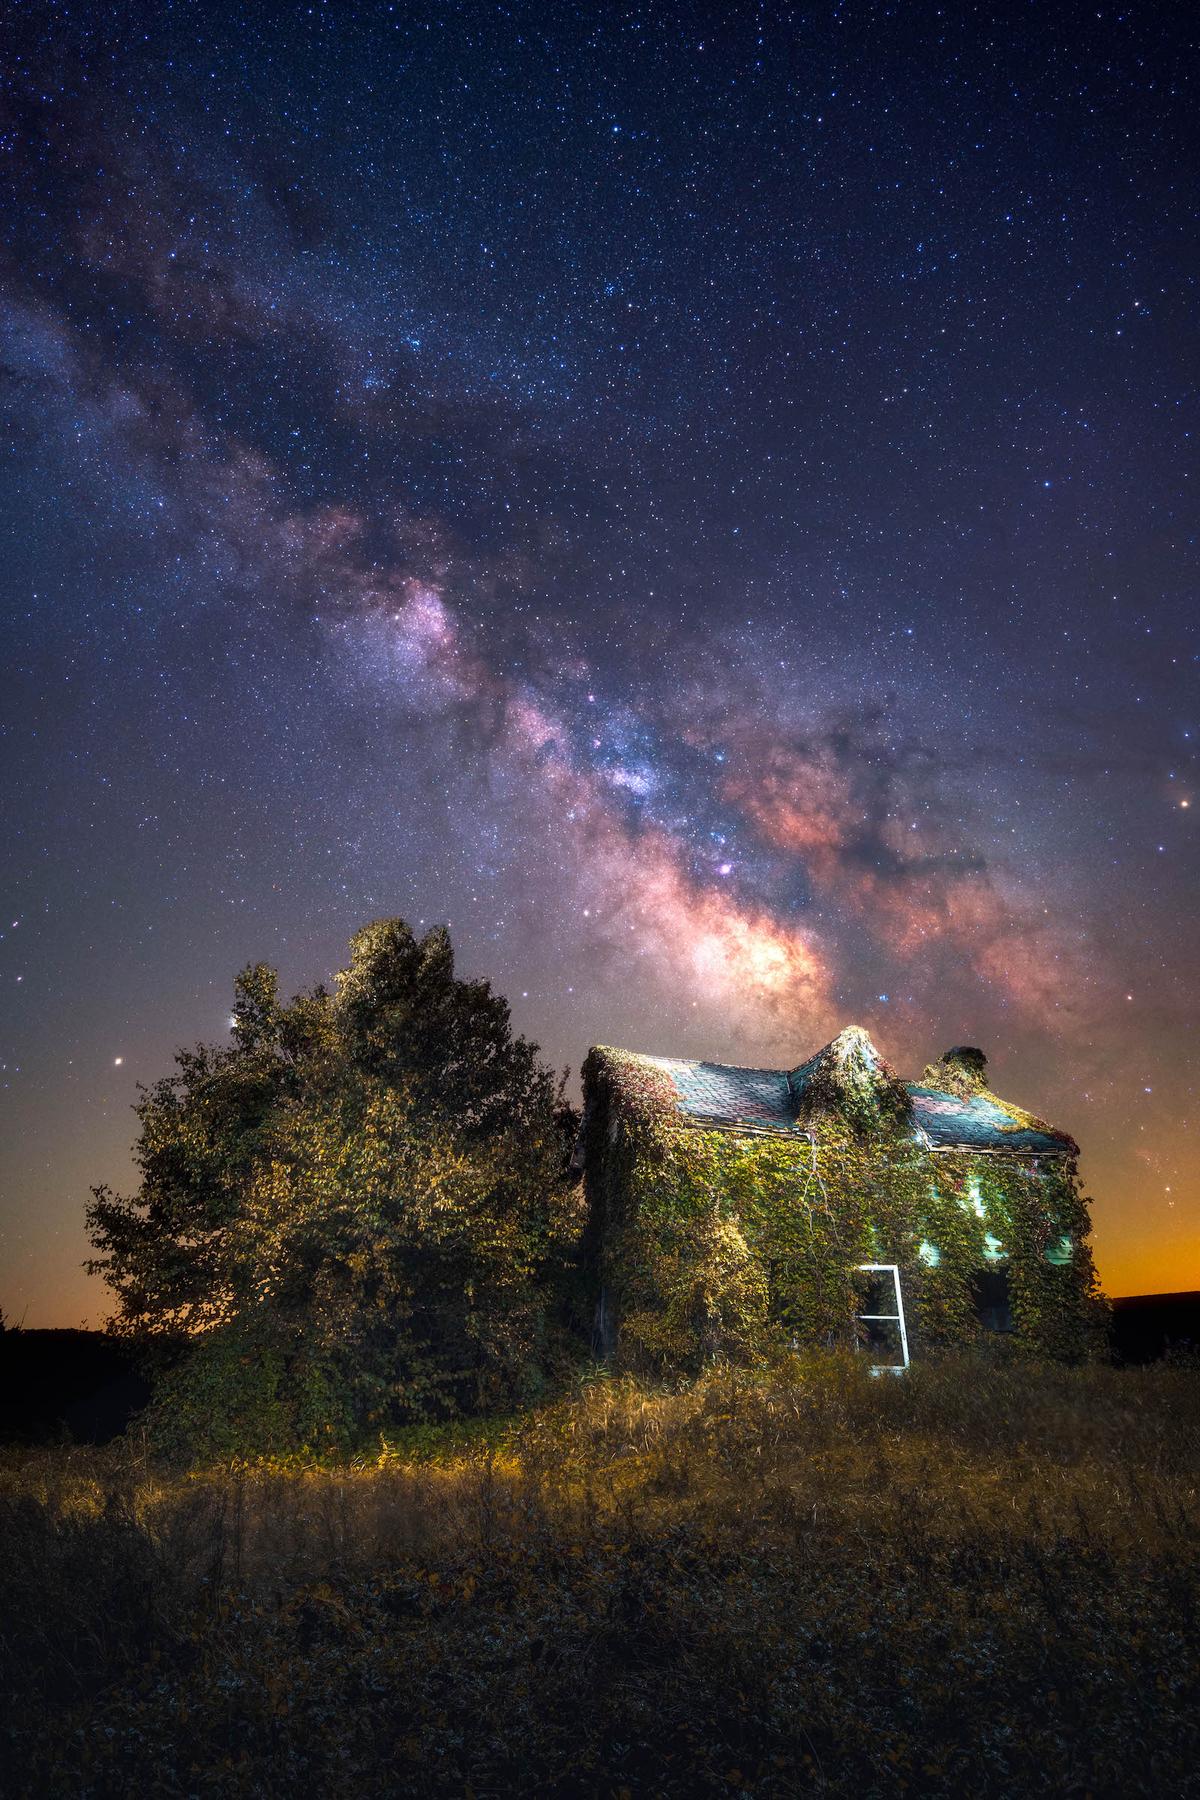 The Milky Way over Shelburne, Ontario, Canada. (Gary Cummins/Caters News)